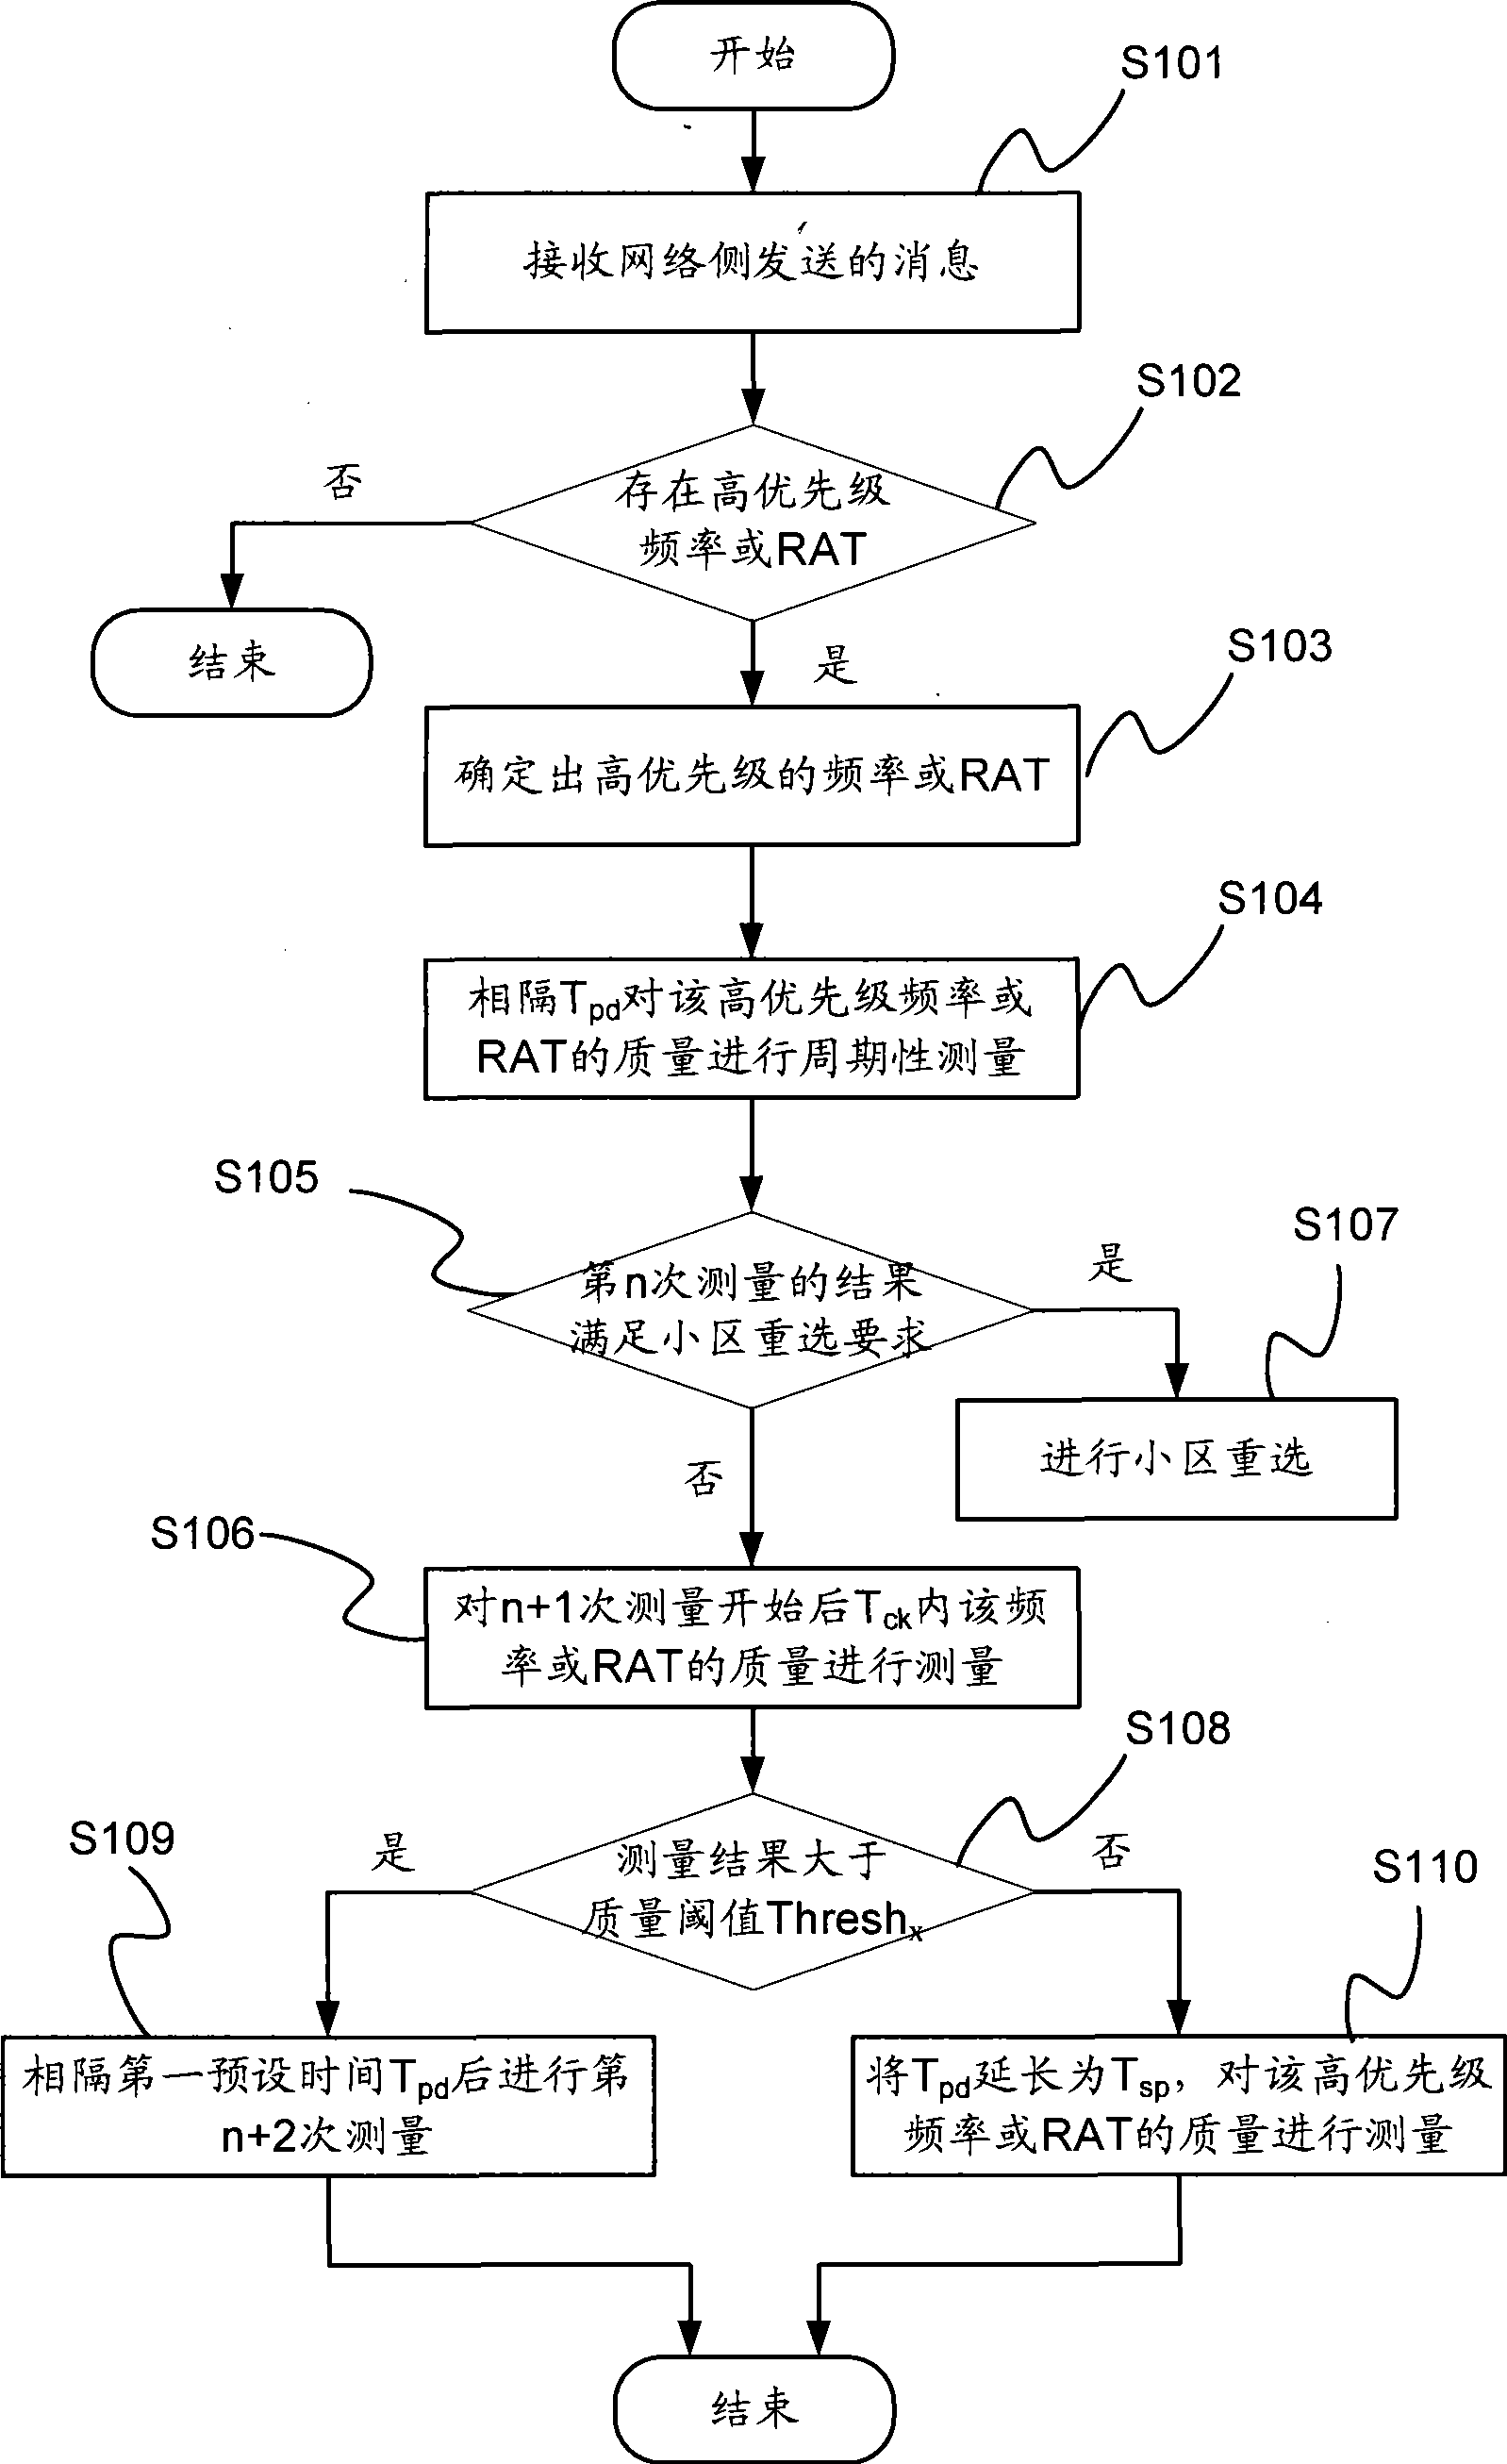 Measuring method and device for subdistrict reselection